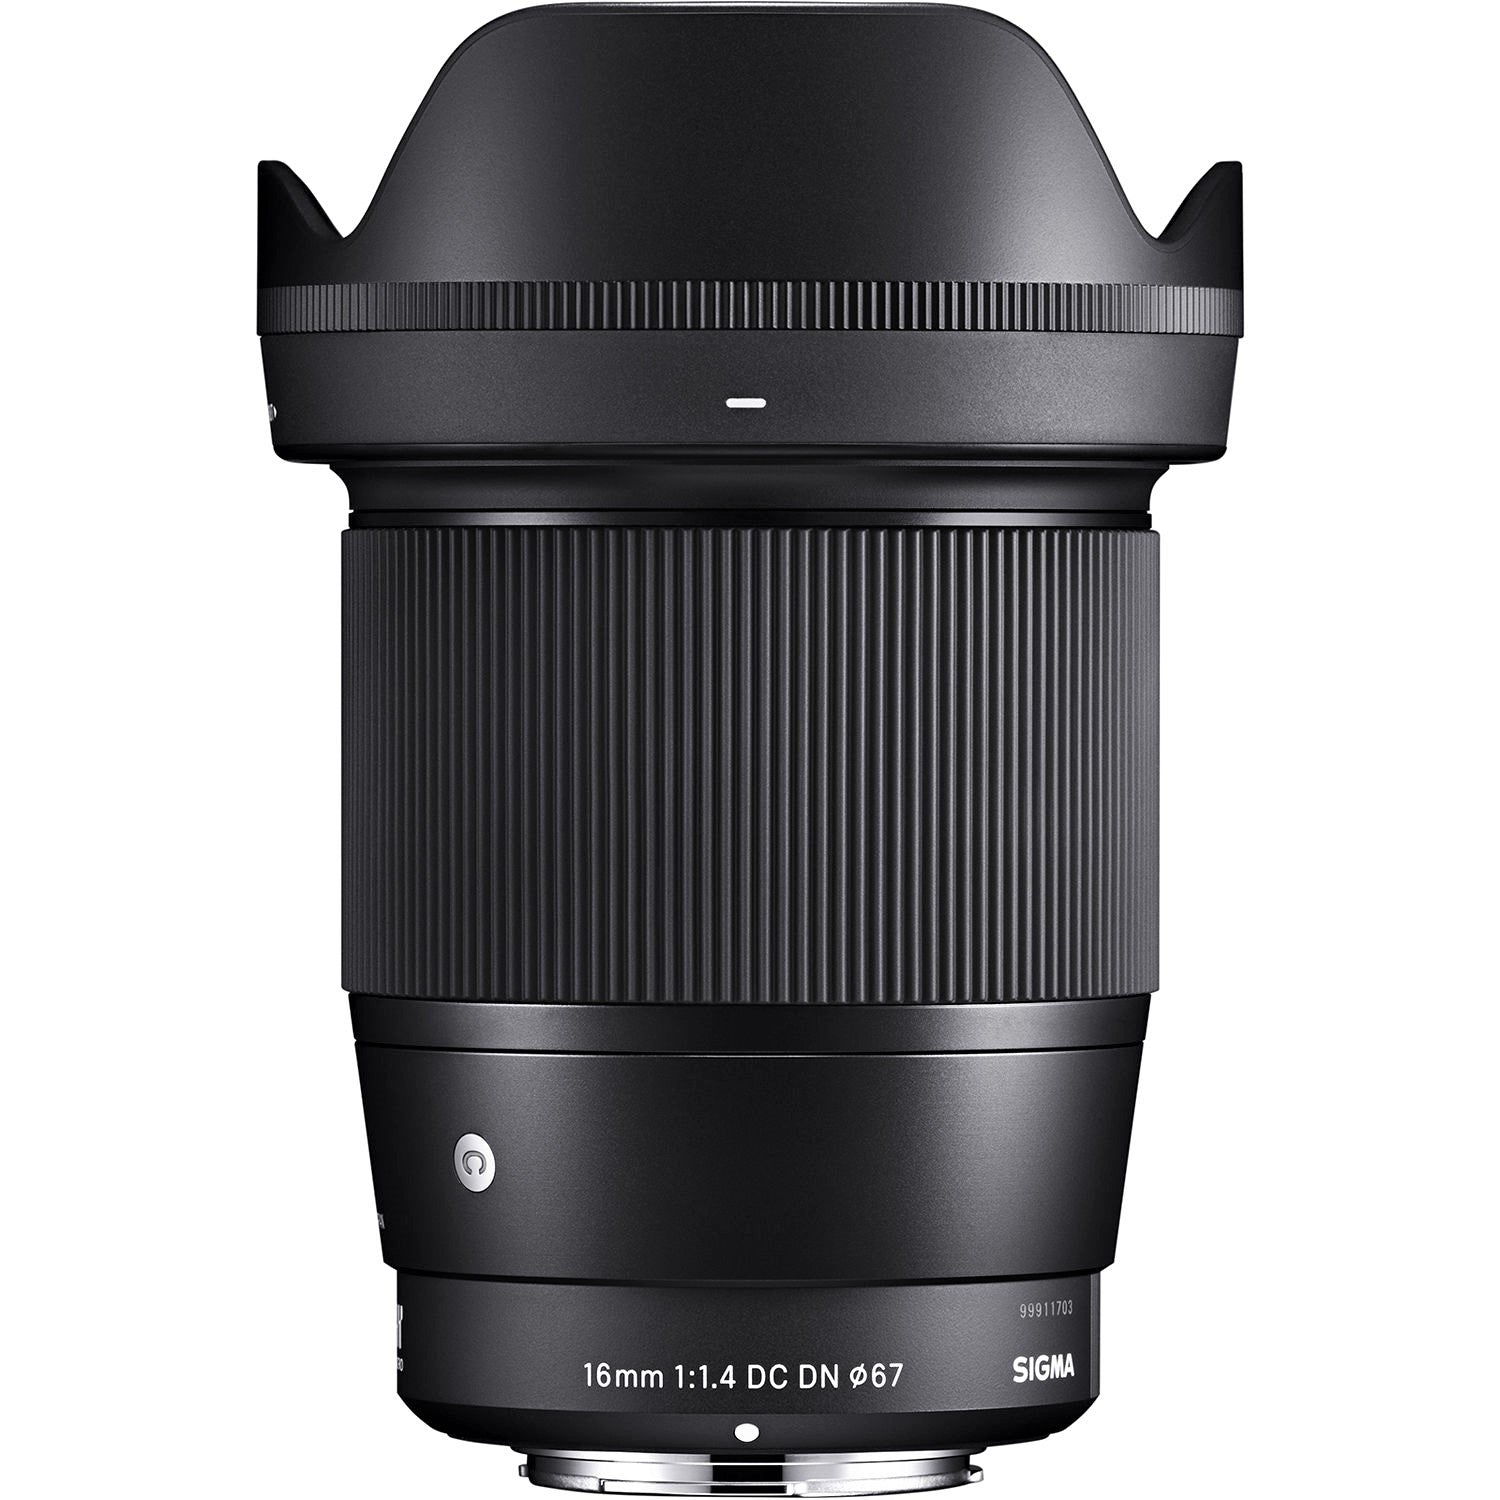 Sigma Lens Hood Attached to 16mm F1.4 DC DN Contemporary Lens